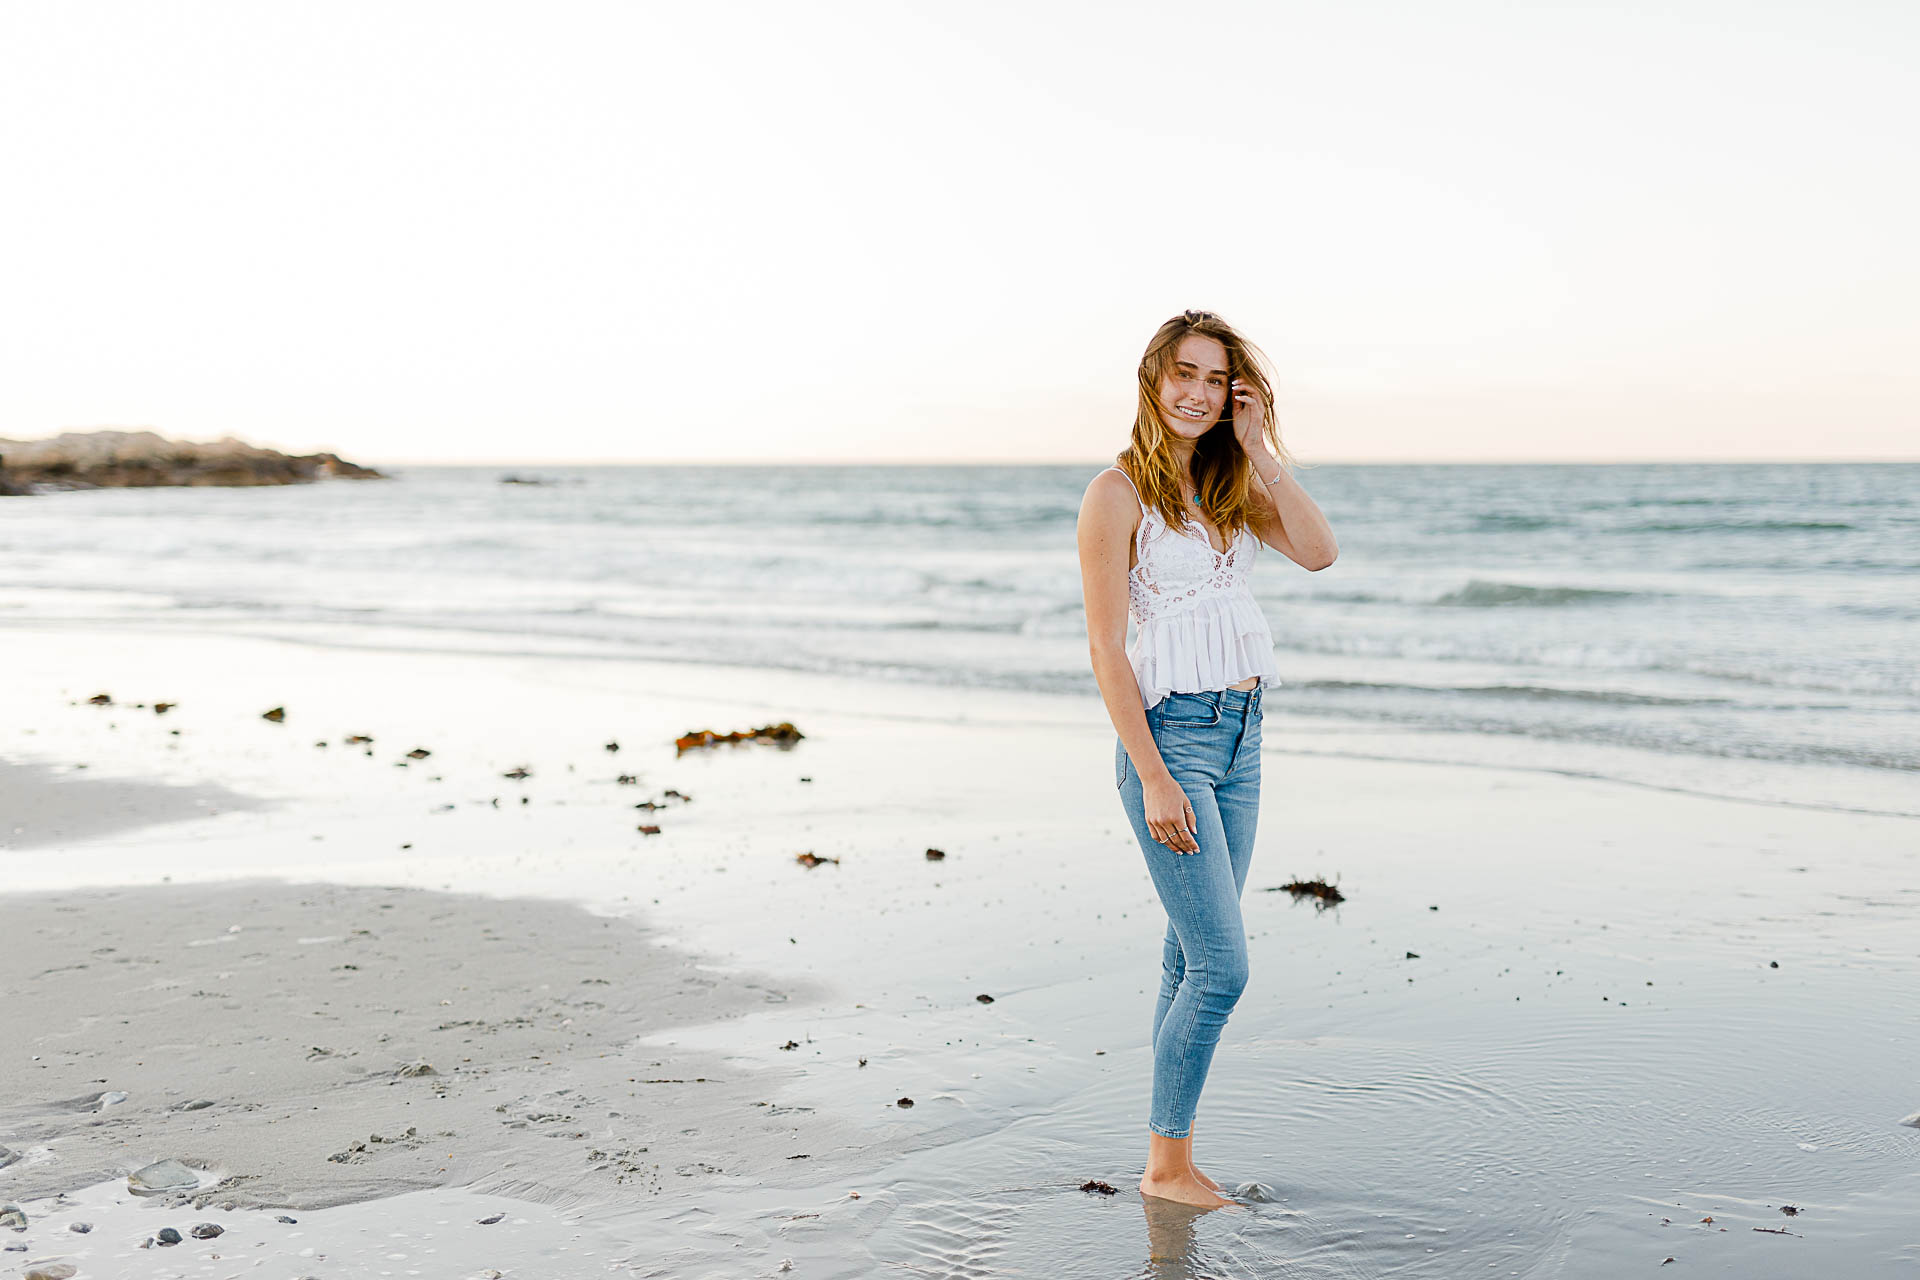 Photo by Scituate Senior Portrait Photographer Christina Runnals | Girl standing on the beach